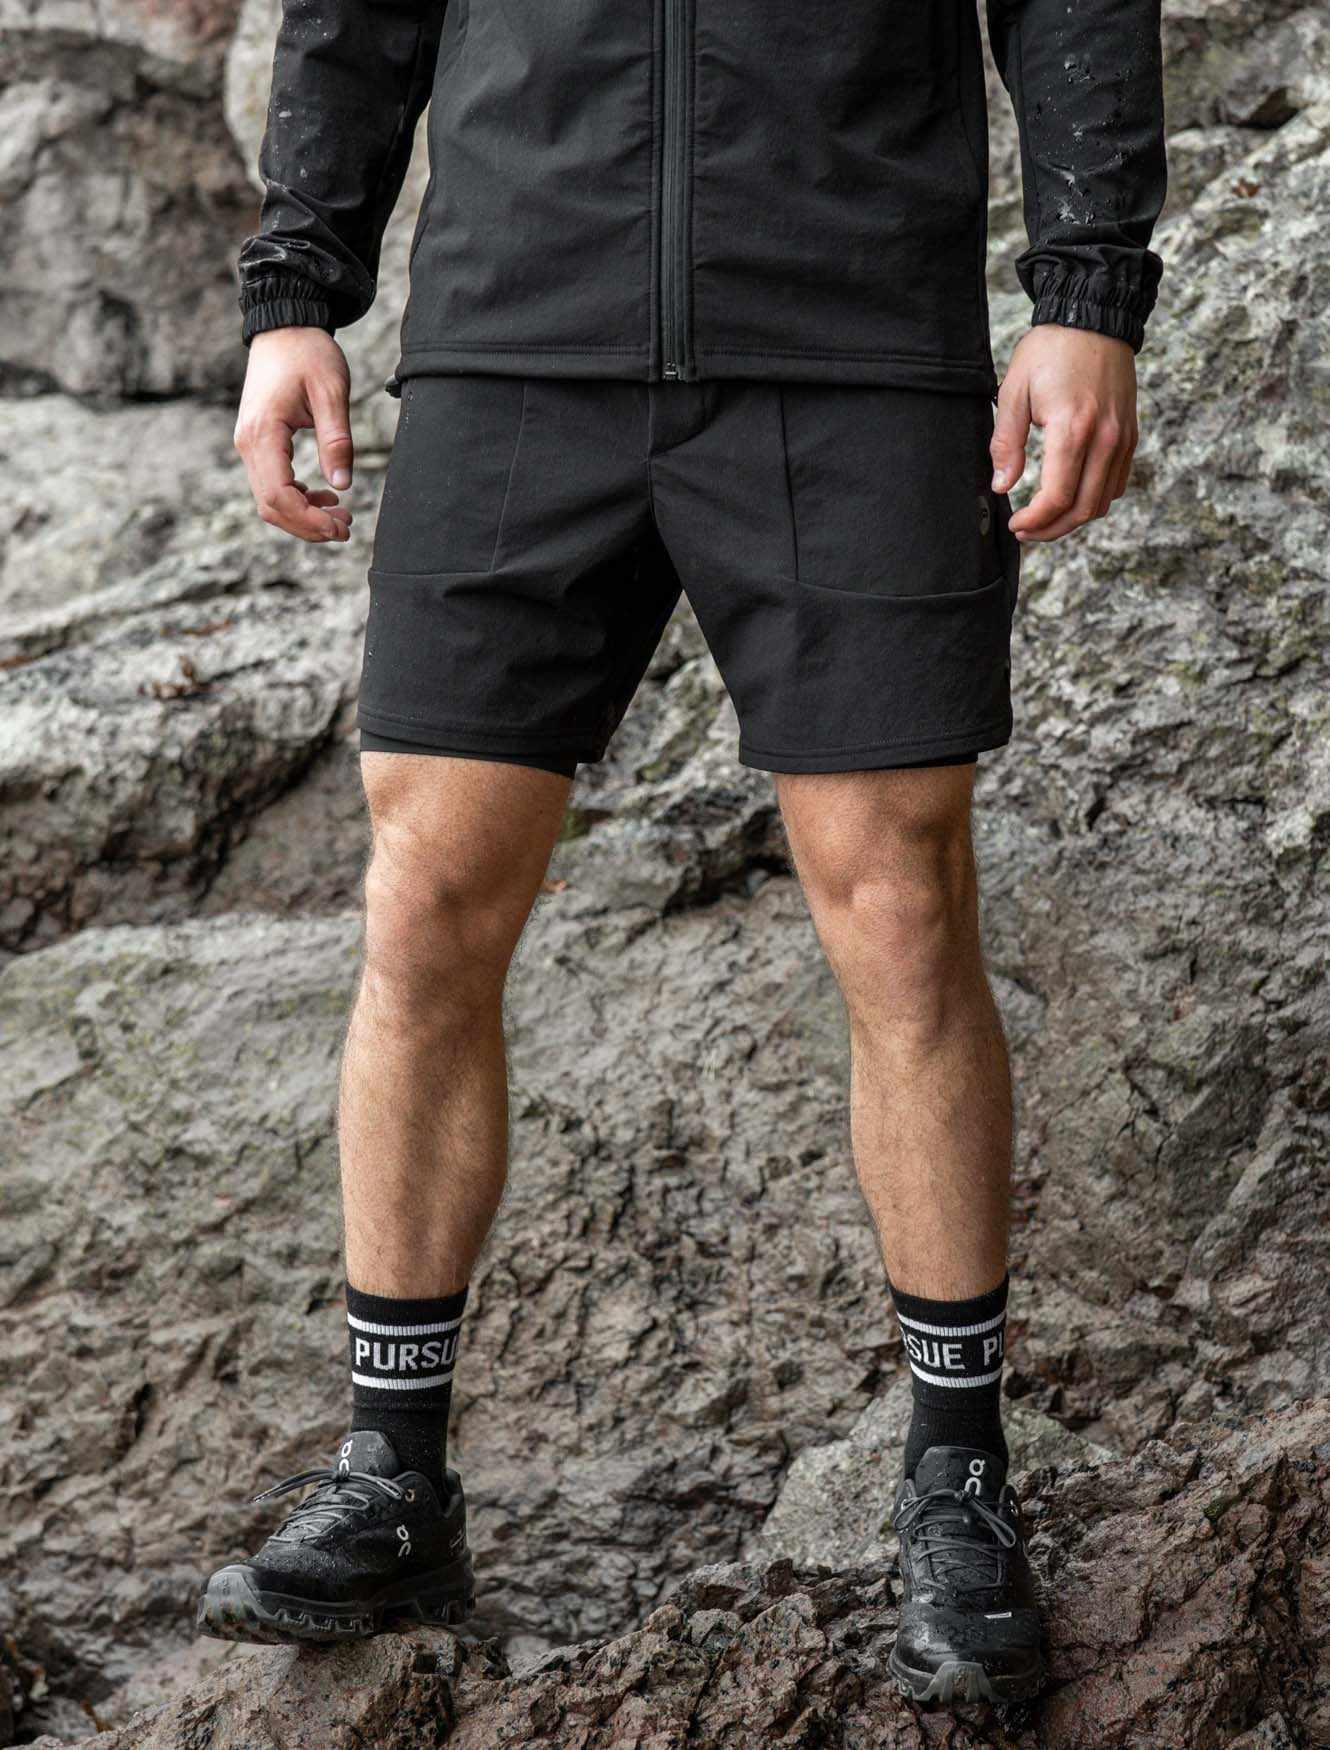 Utility 2-in-1 Shorts / Black Pursue Fitness 5